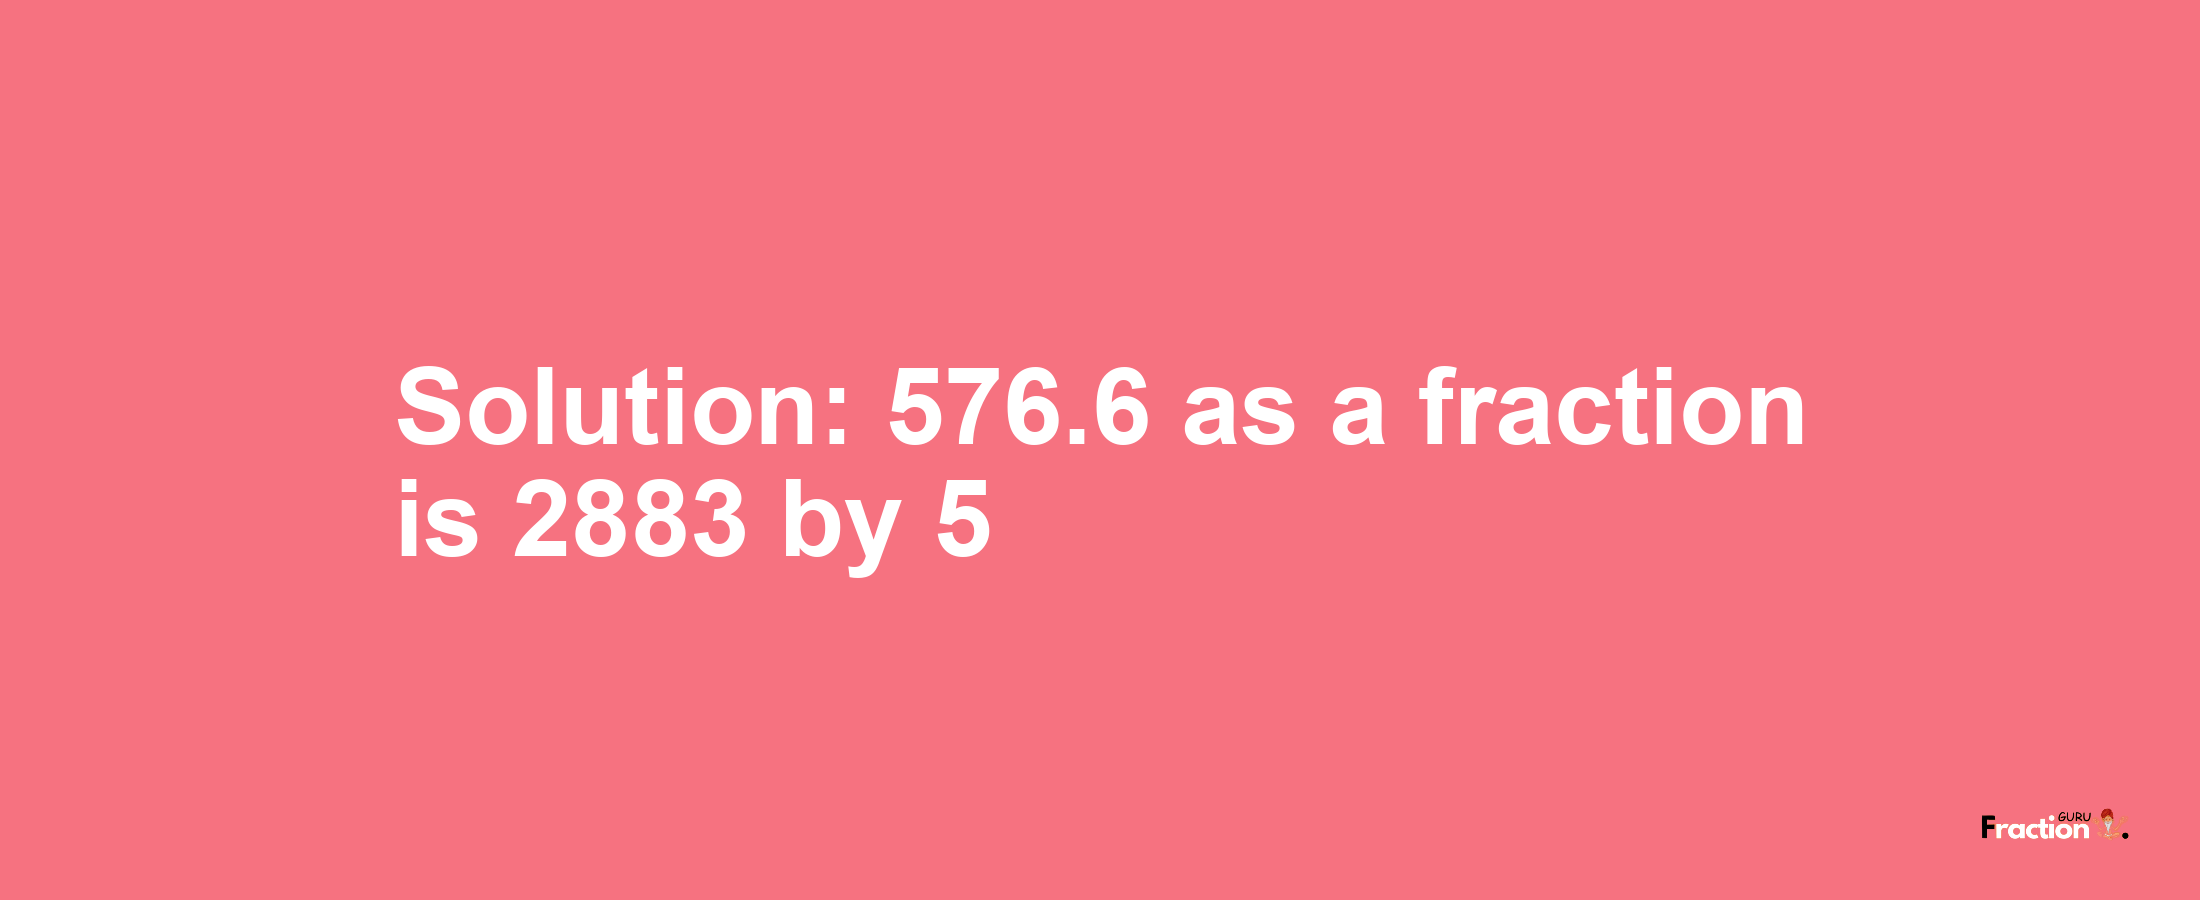 Solution:576.6 as a fraction is 2883/5